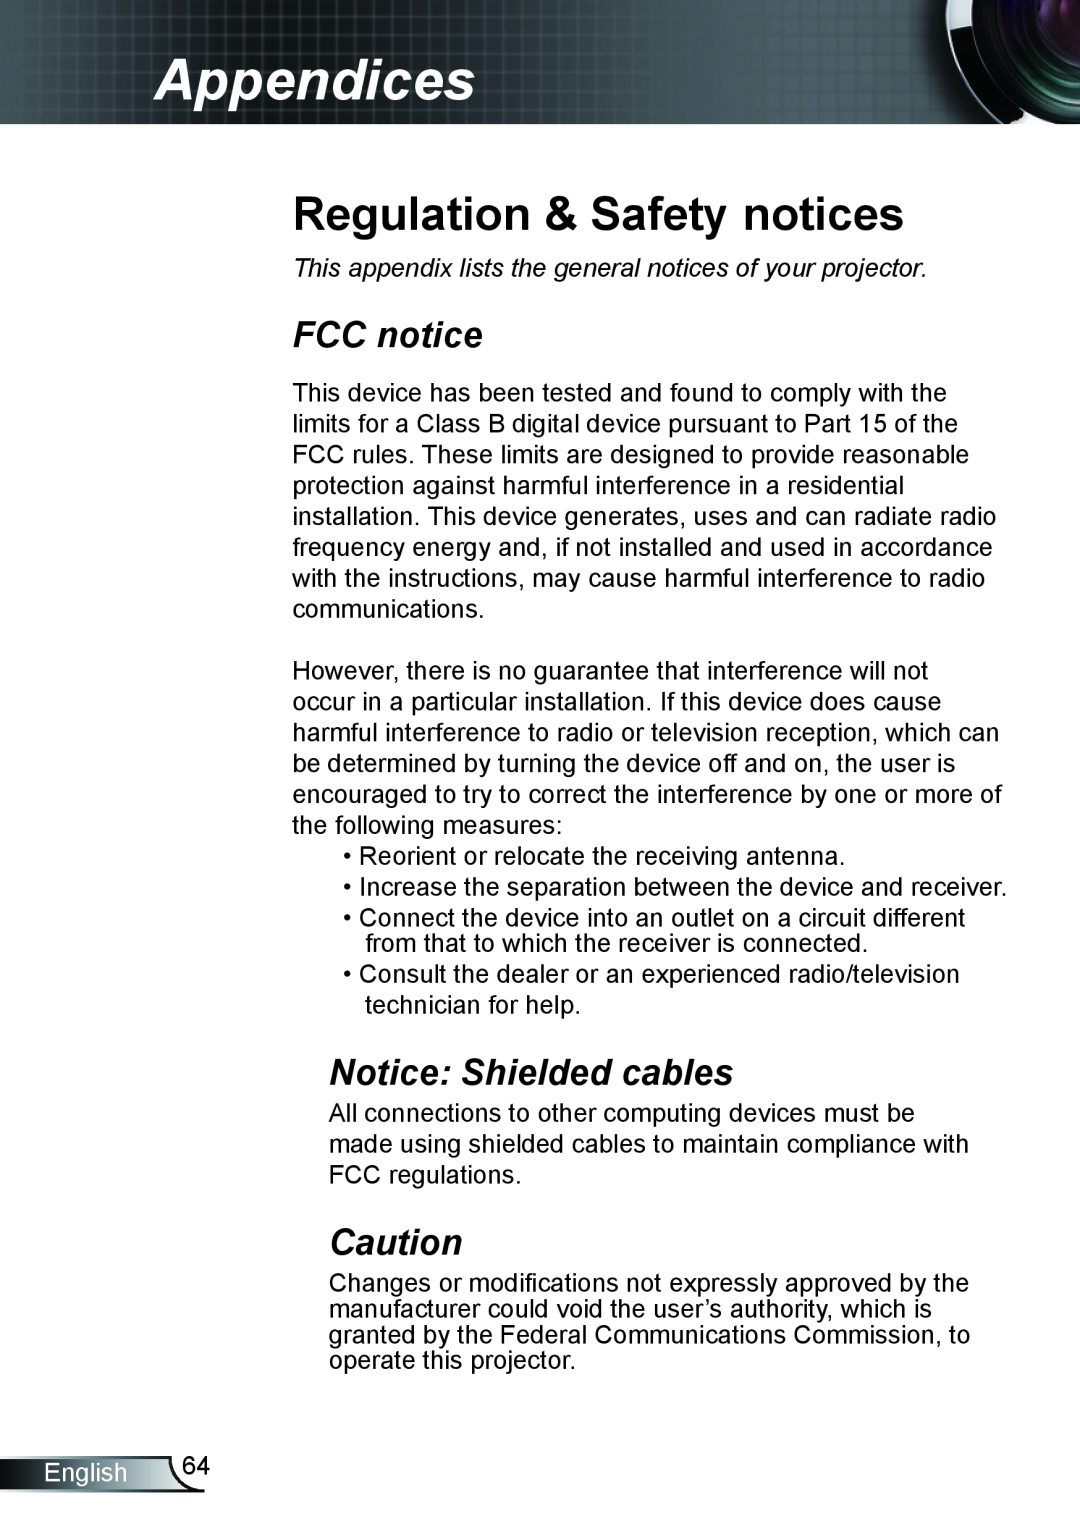 Optoma Technology TX762GOV FCC notice, Notice Shielded cables, This appendix lists the general notices of your projector 